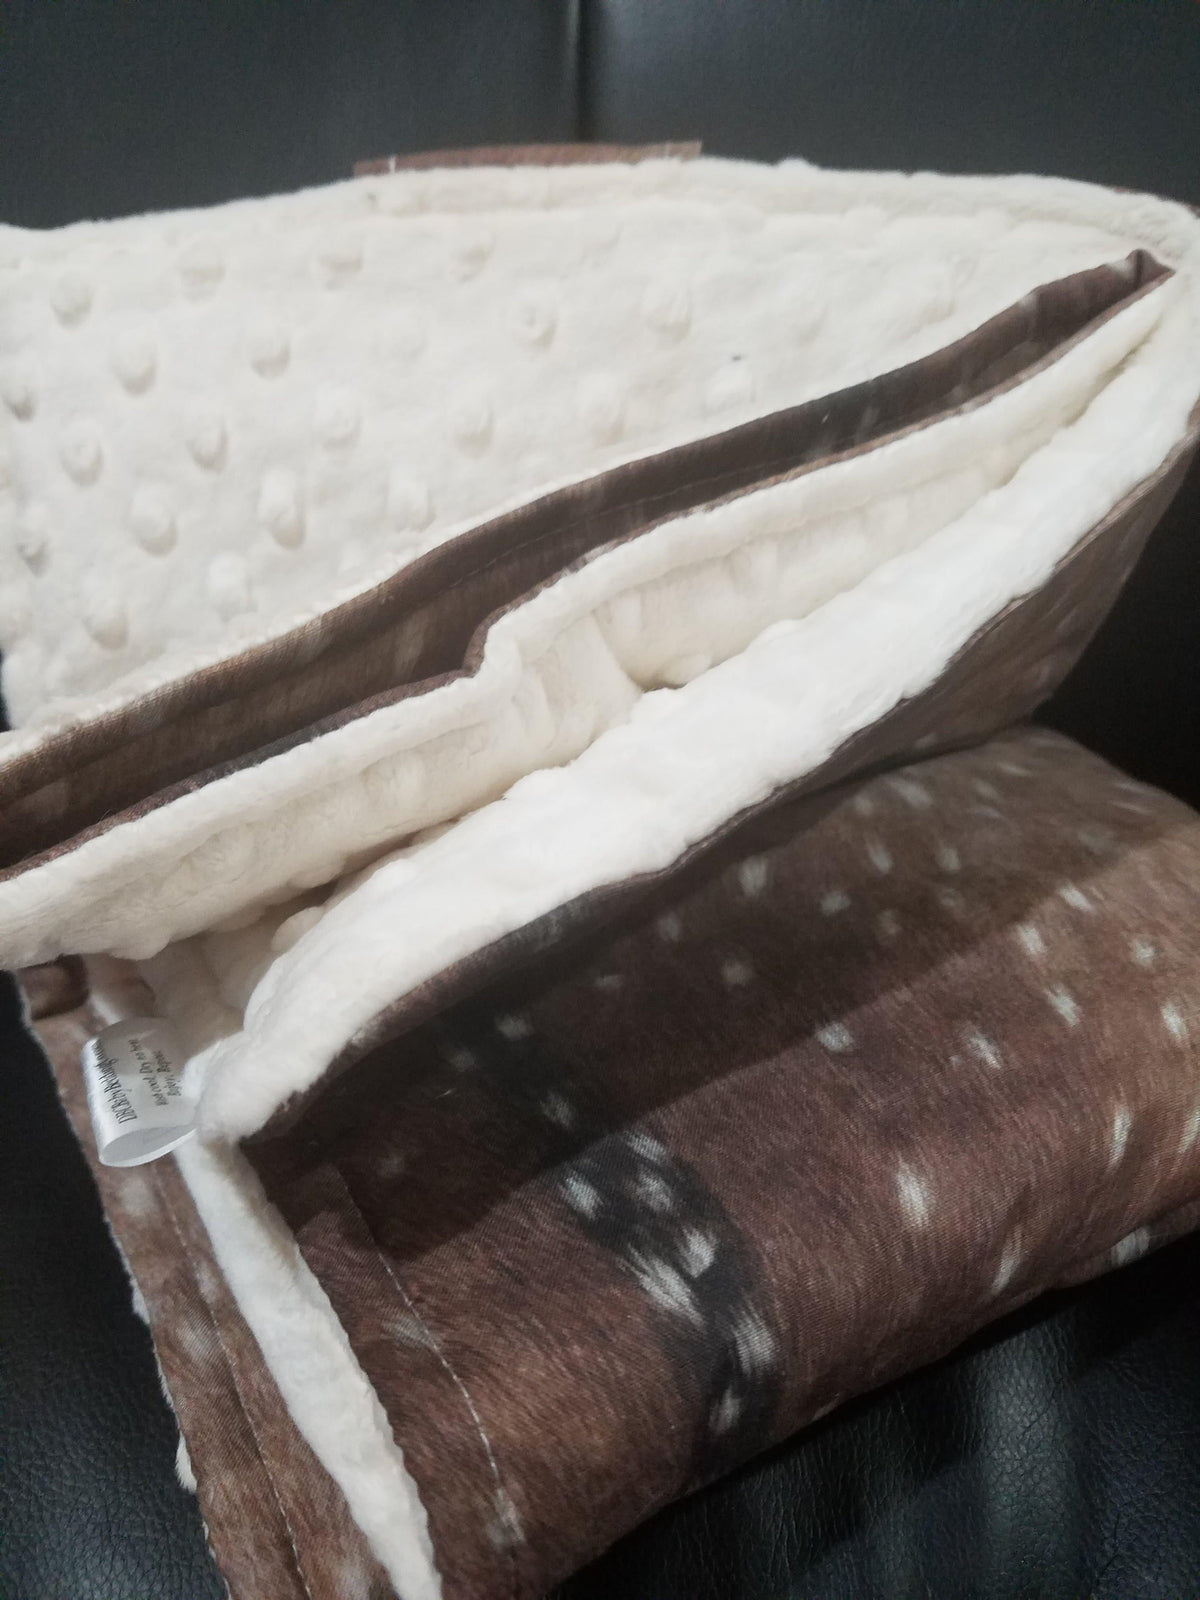 On the Go Changing Pad-Deer Skin Cotton -Woodland - DBC Baby Bedding Co 